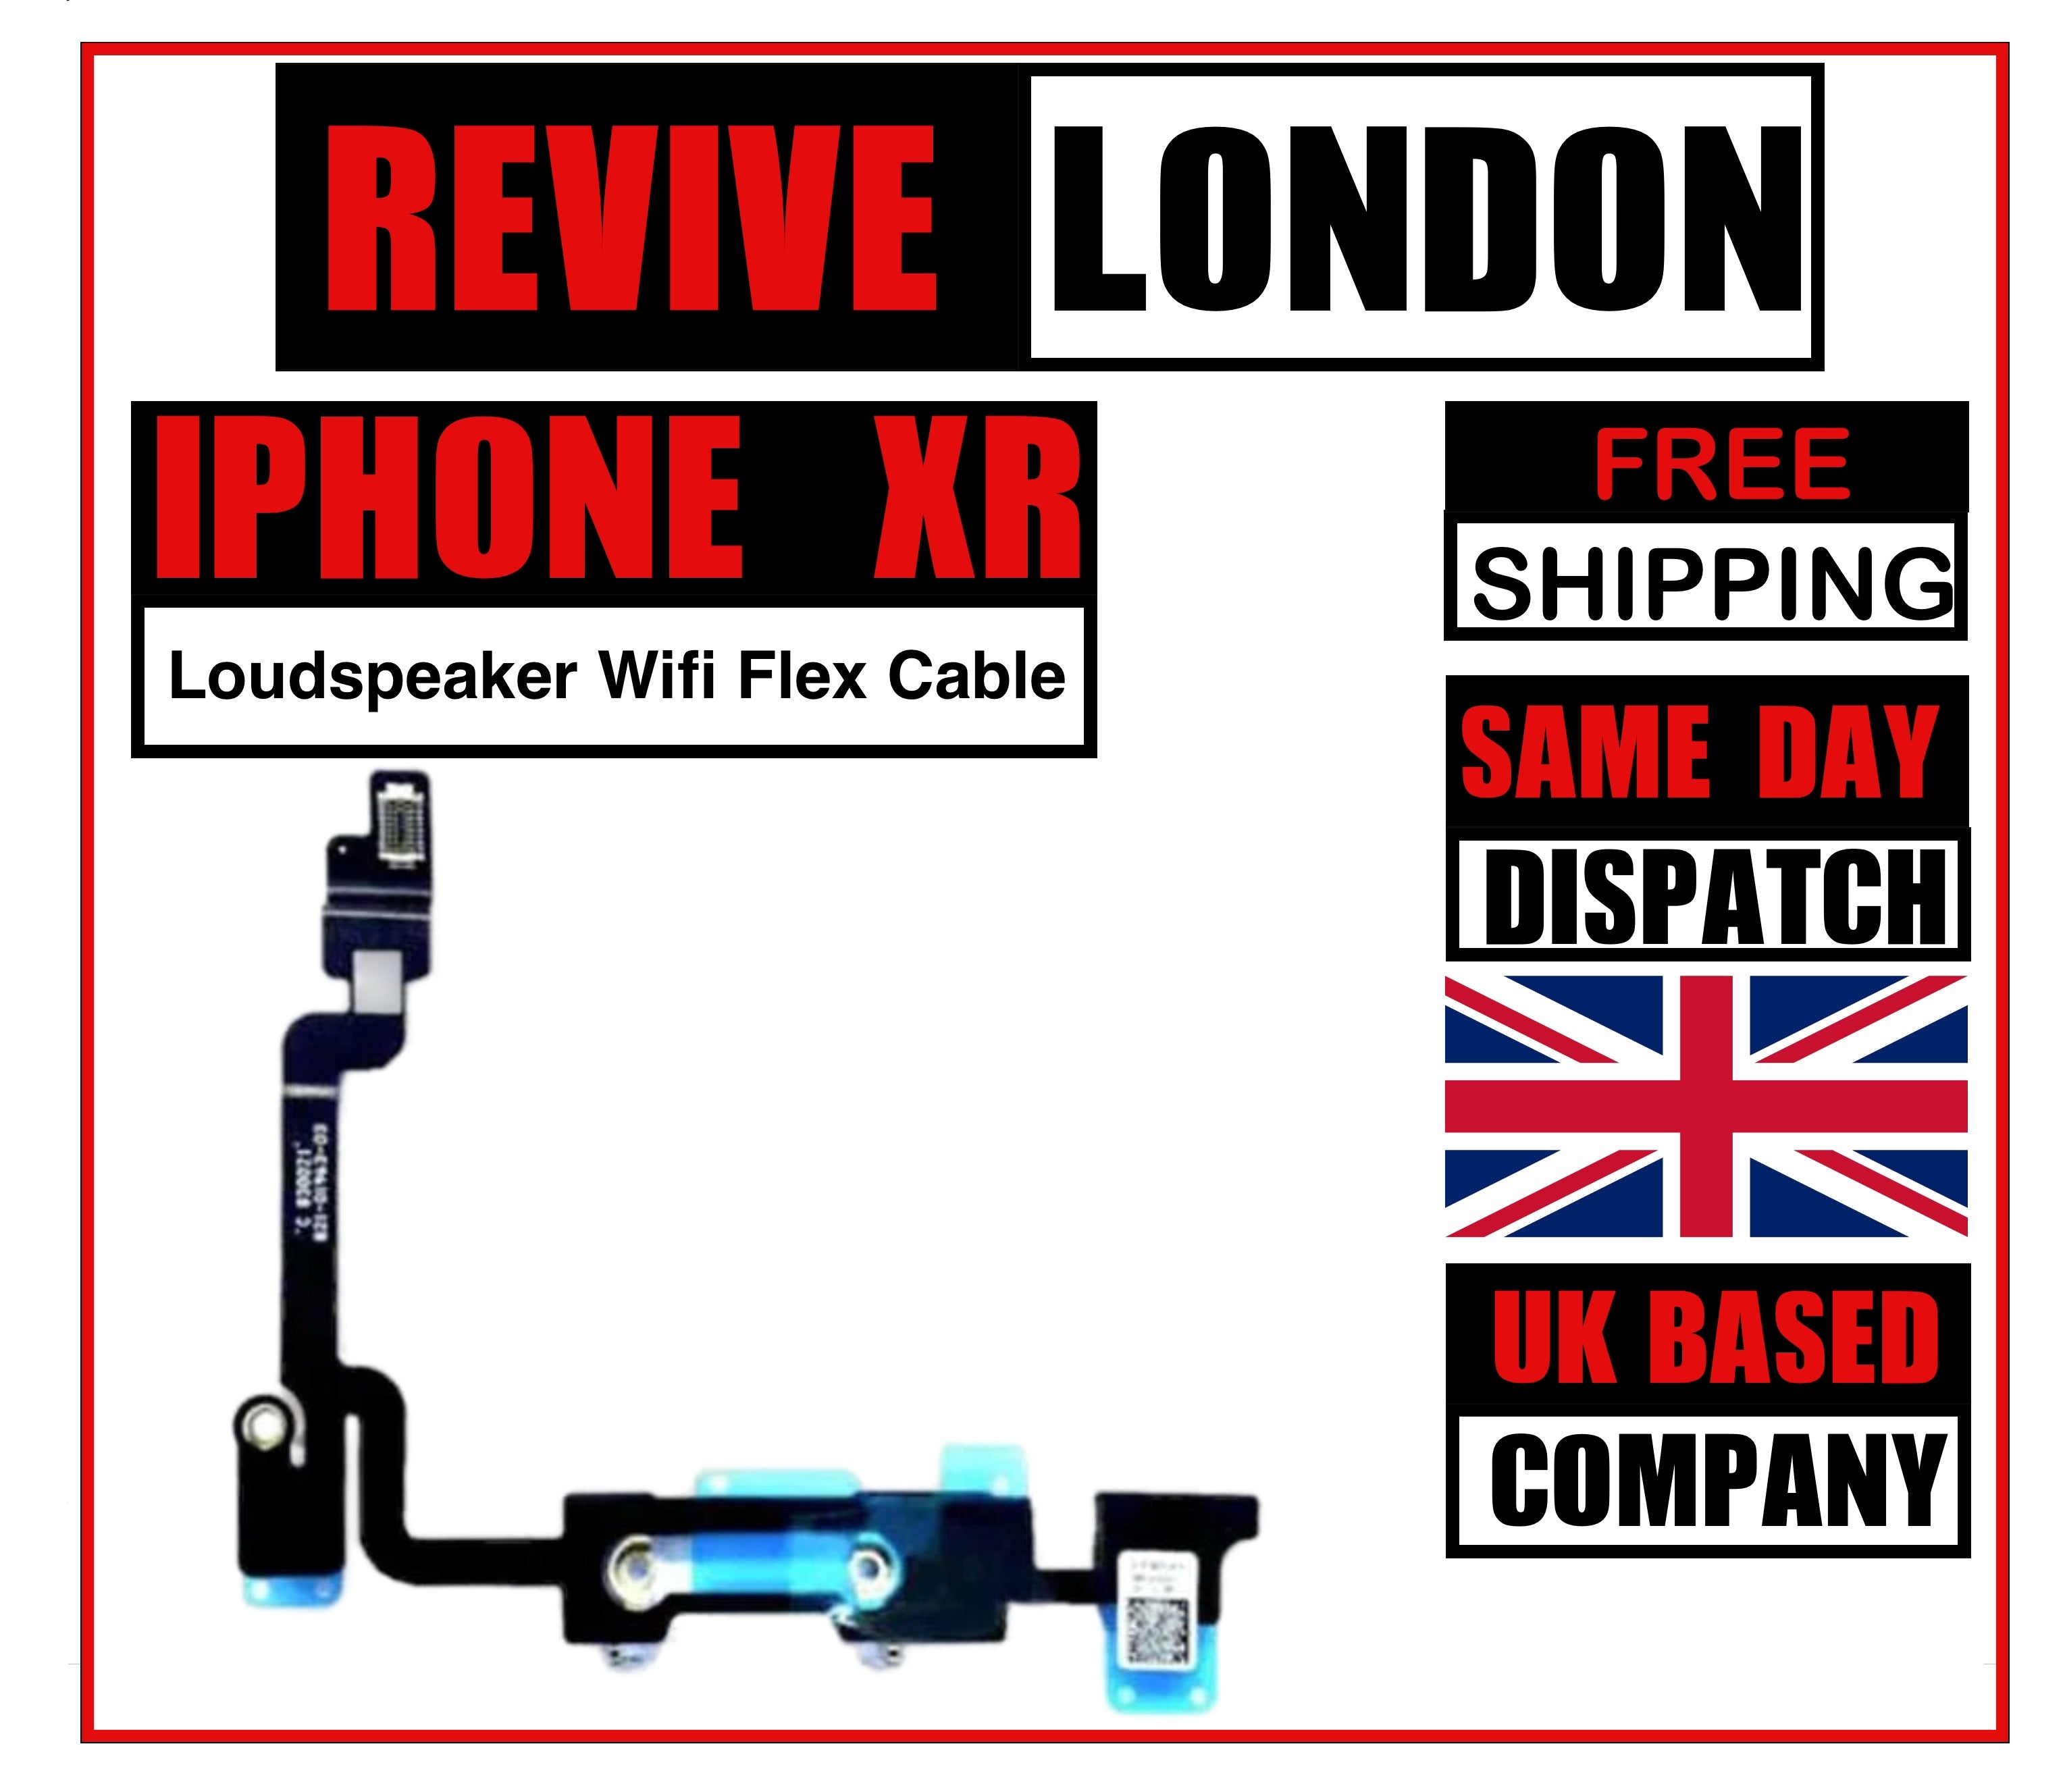 For Apple iPhone XR Replacement Loudspeaker Wifi Flex Cable